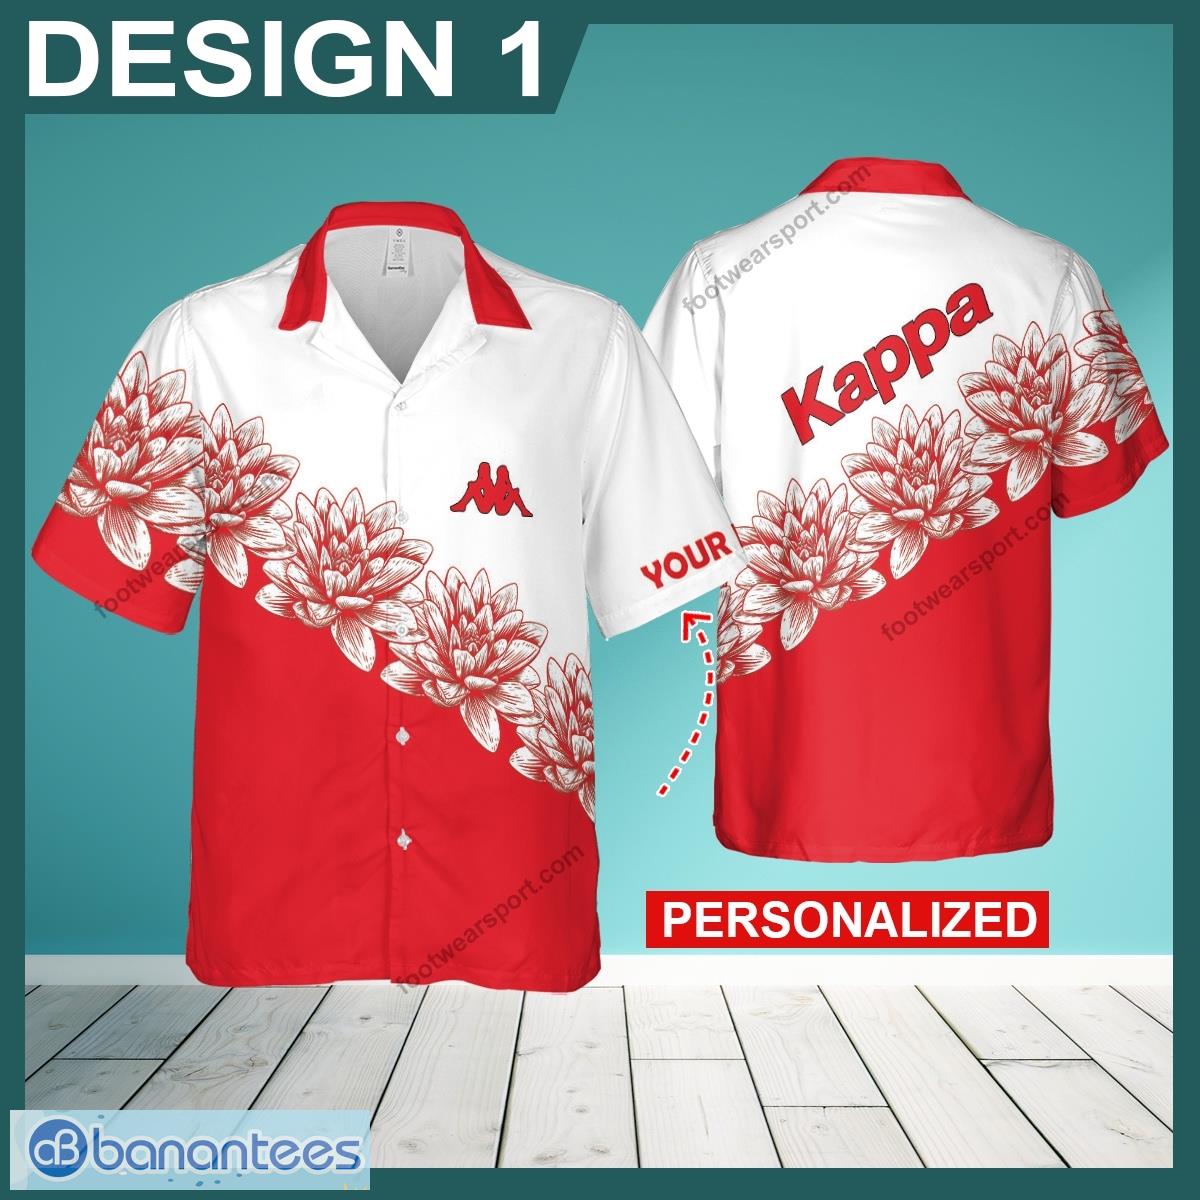 kappa brand logo sport jersey, color sky blue, pure white, theme white,  powerful, water-inspired patterns